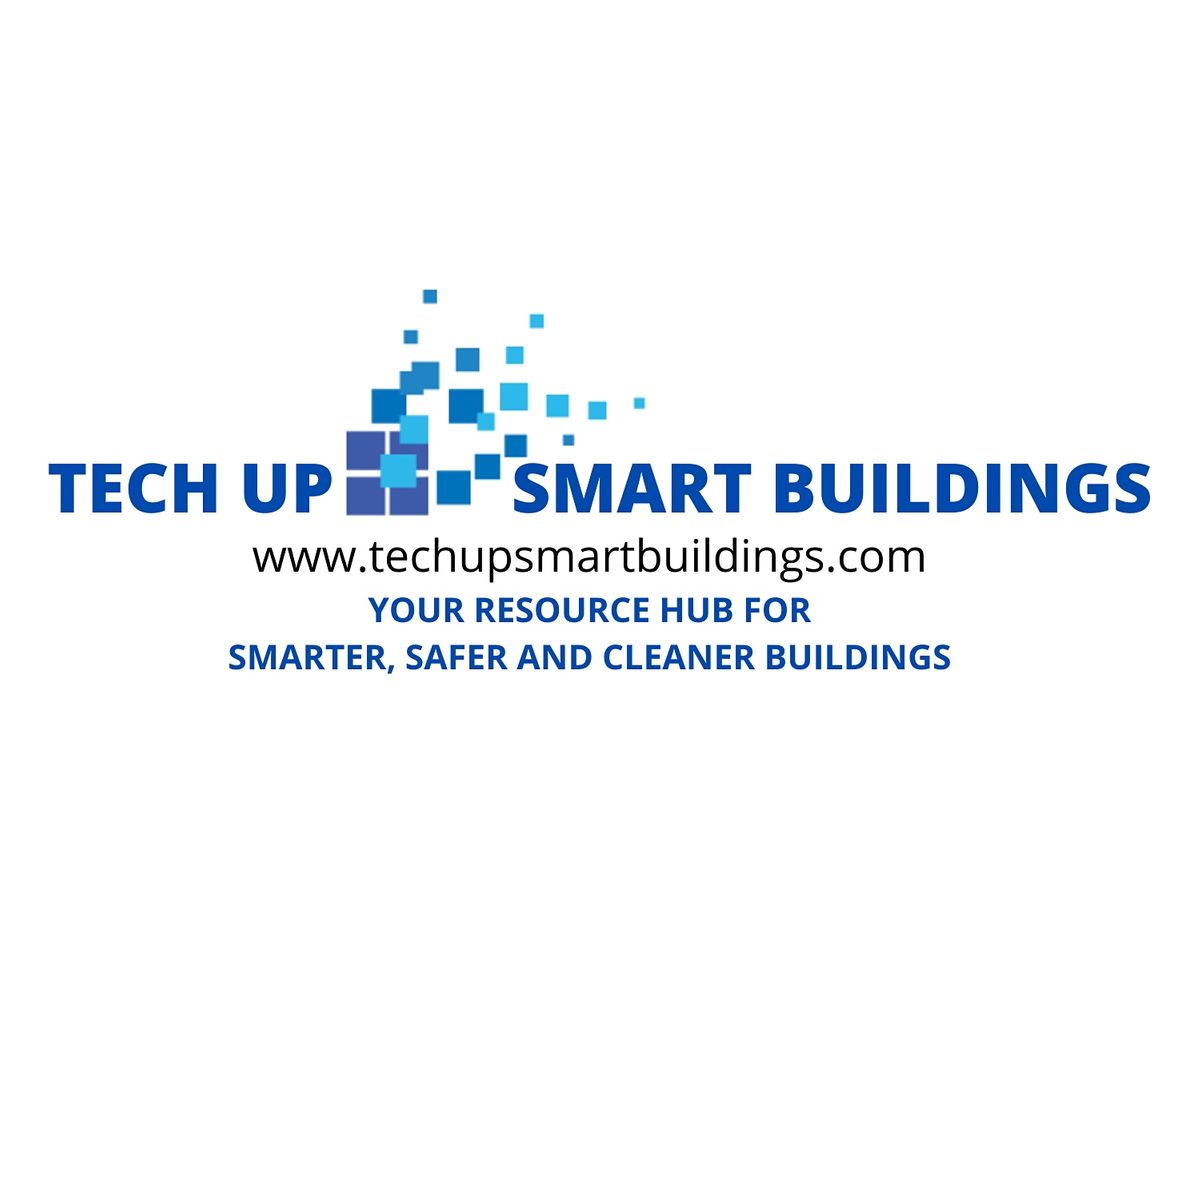 TECH UP SMART BUILDINGS CONFERENCE - Resources to Bring Workforce Back